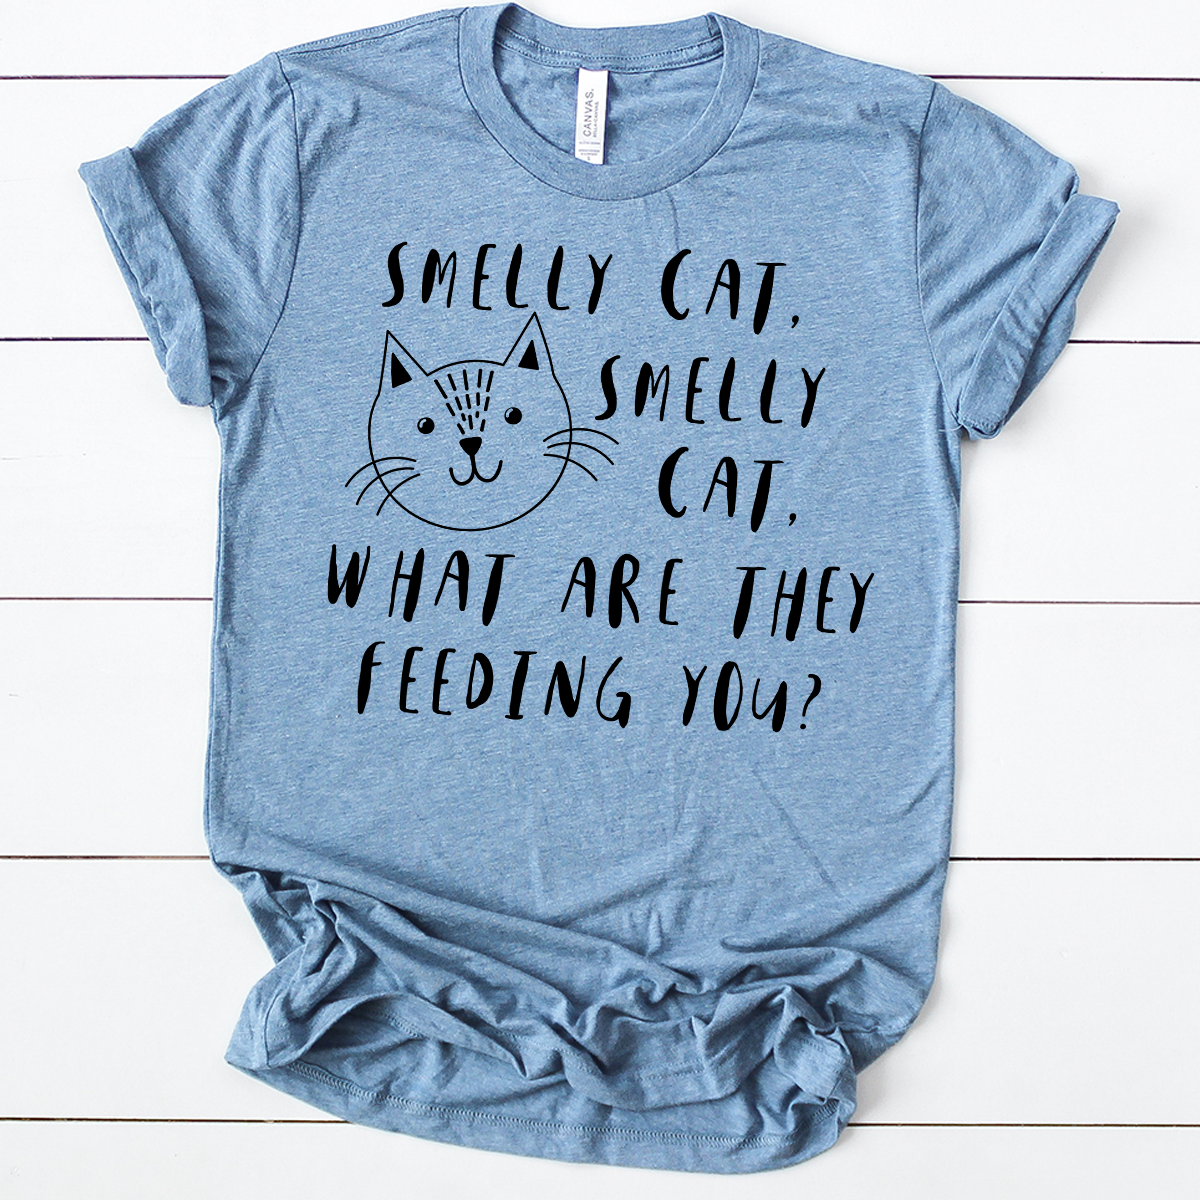 Smelly Cat Smelly Cat Blue t-shirt